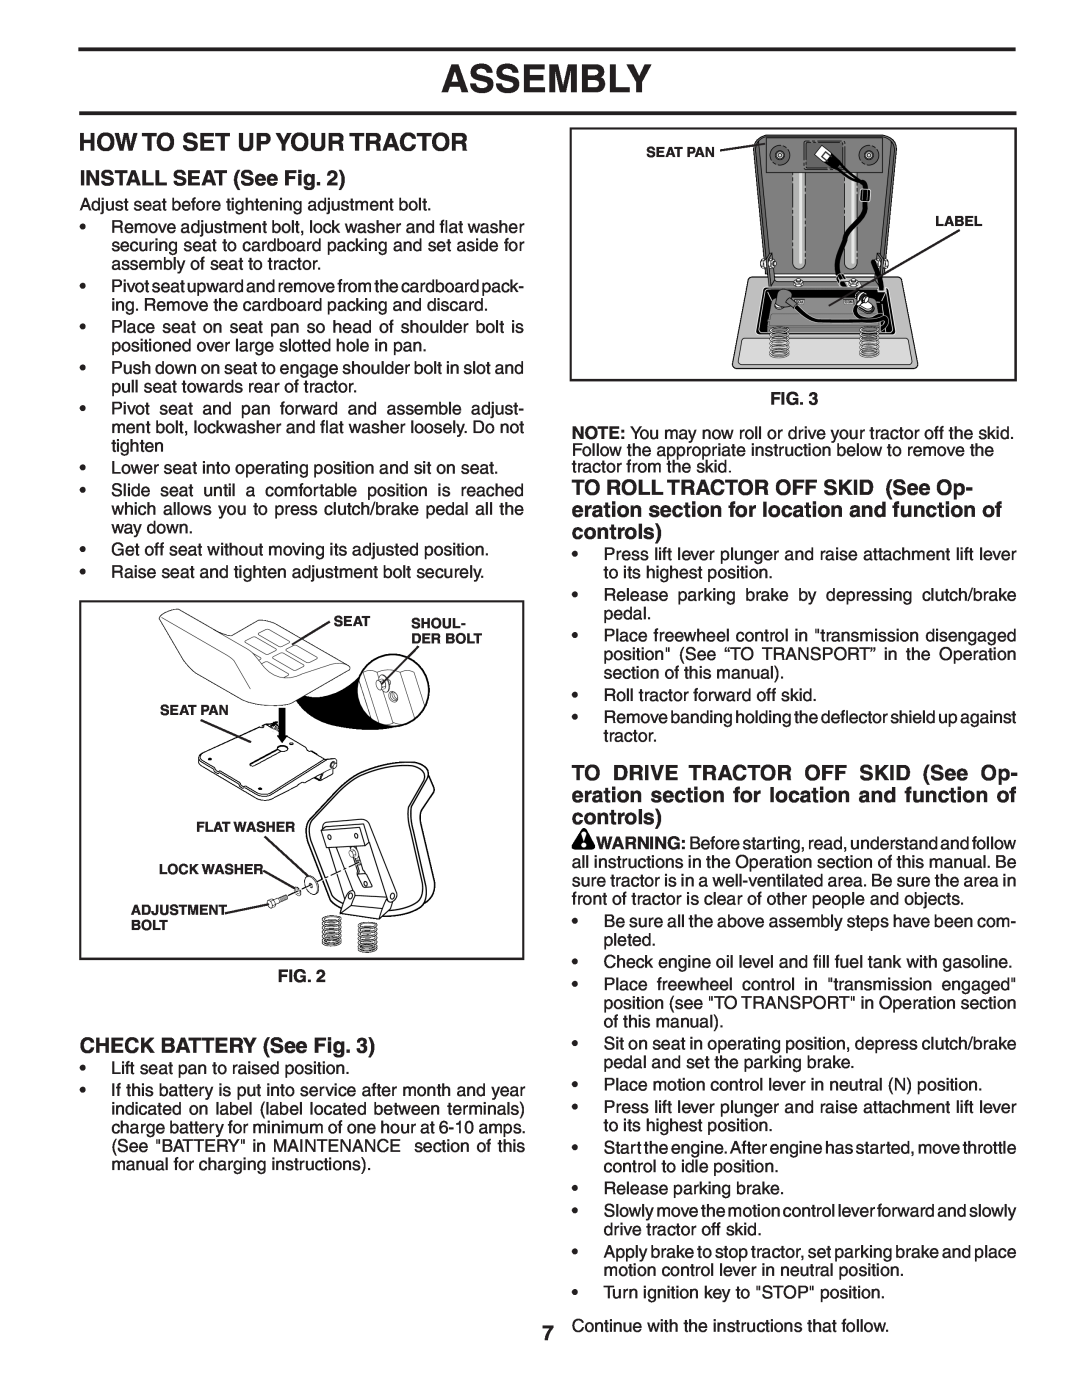 Husqvarna LTH1742 owner manual How To Set Up Your Tractor, INSTALL SEAT See Fig, CHECK BATTERY See Fig, Assembly 